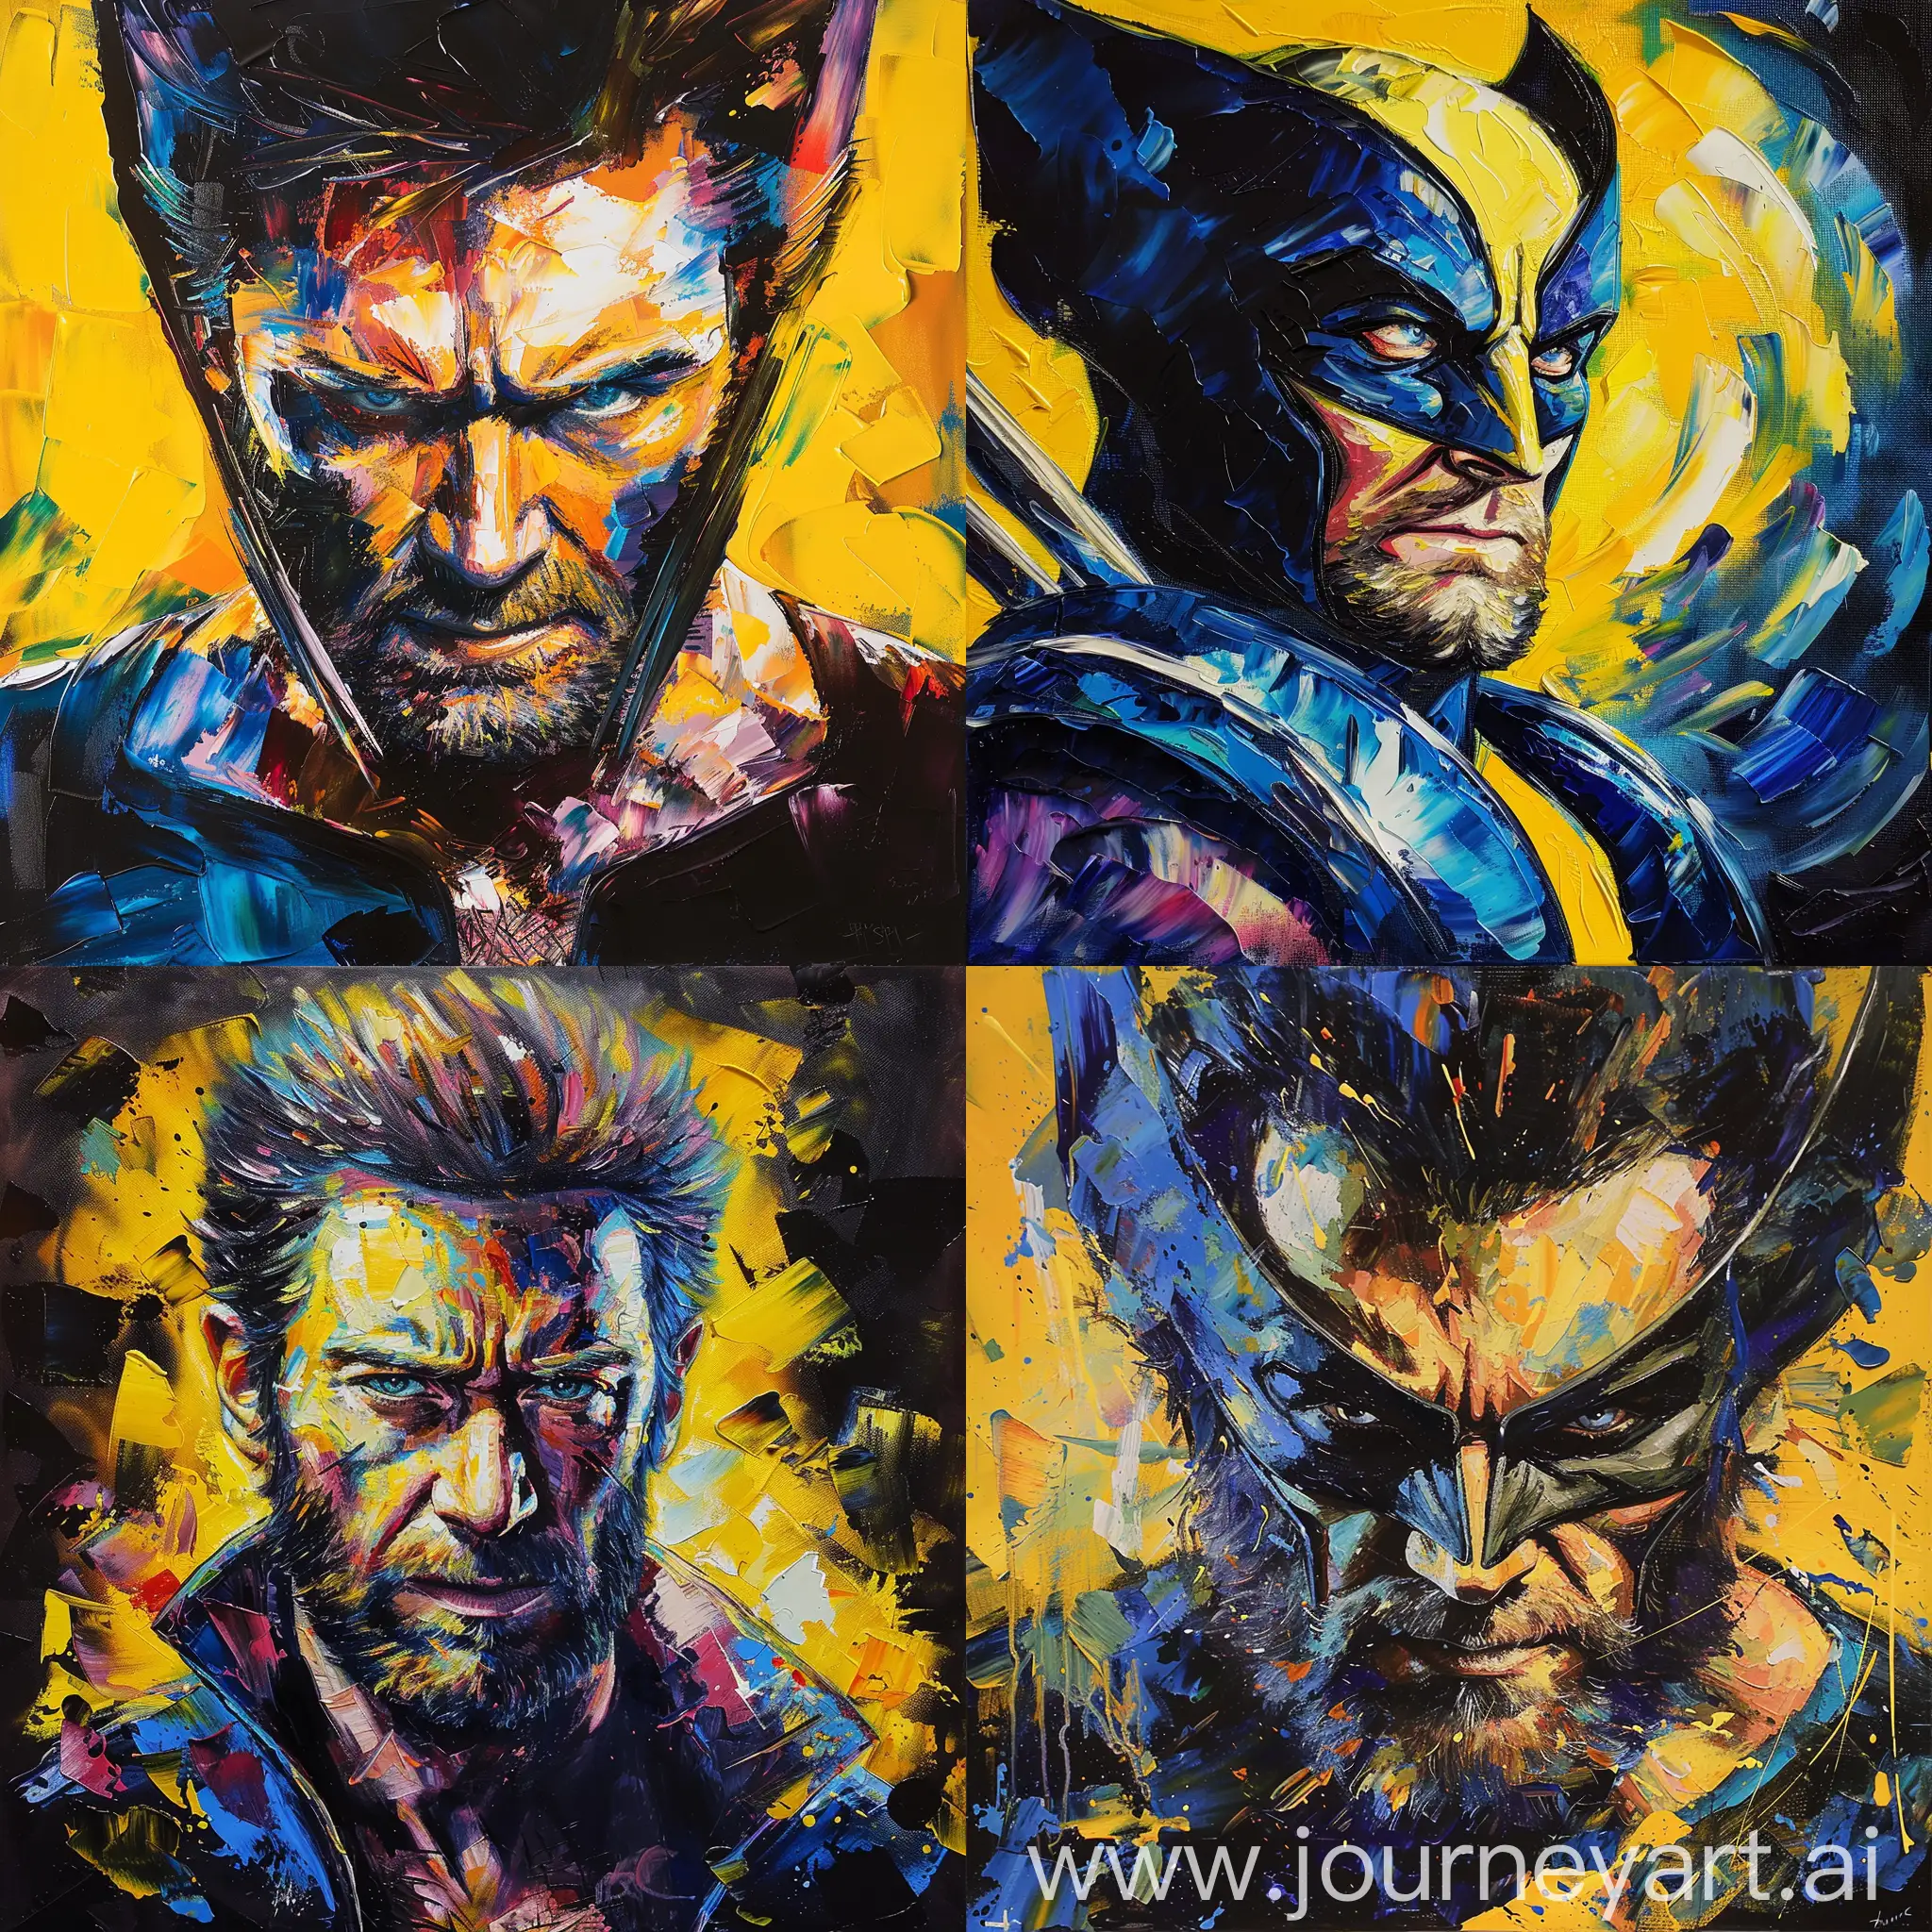 Hugh-Jackman-as-Wolverine-in-Van-Gogh-Style-Oil-Painting-with-Soft-Vibrant-Pastel-Colors